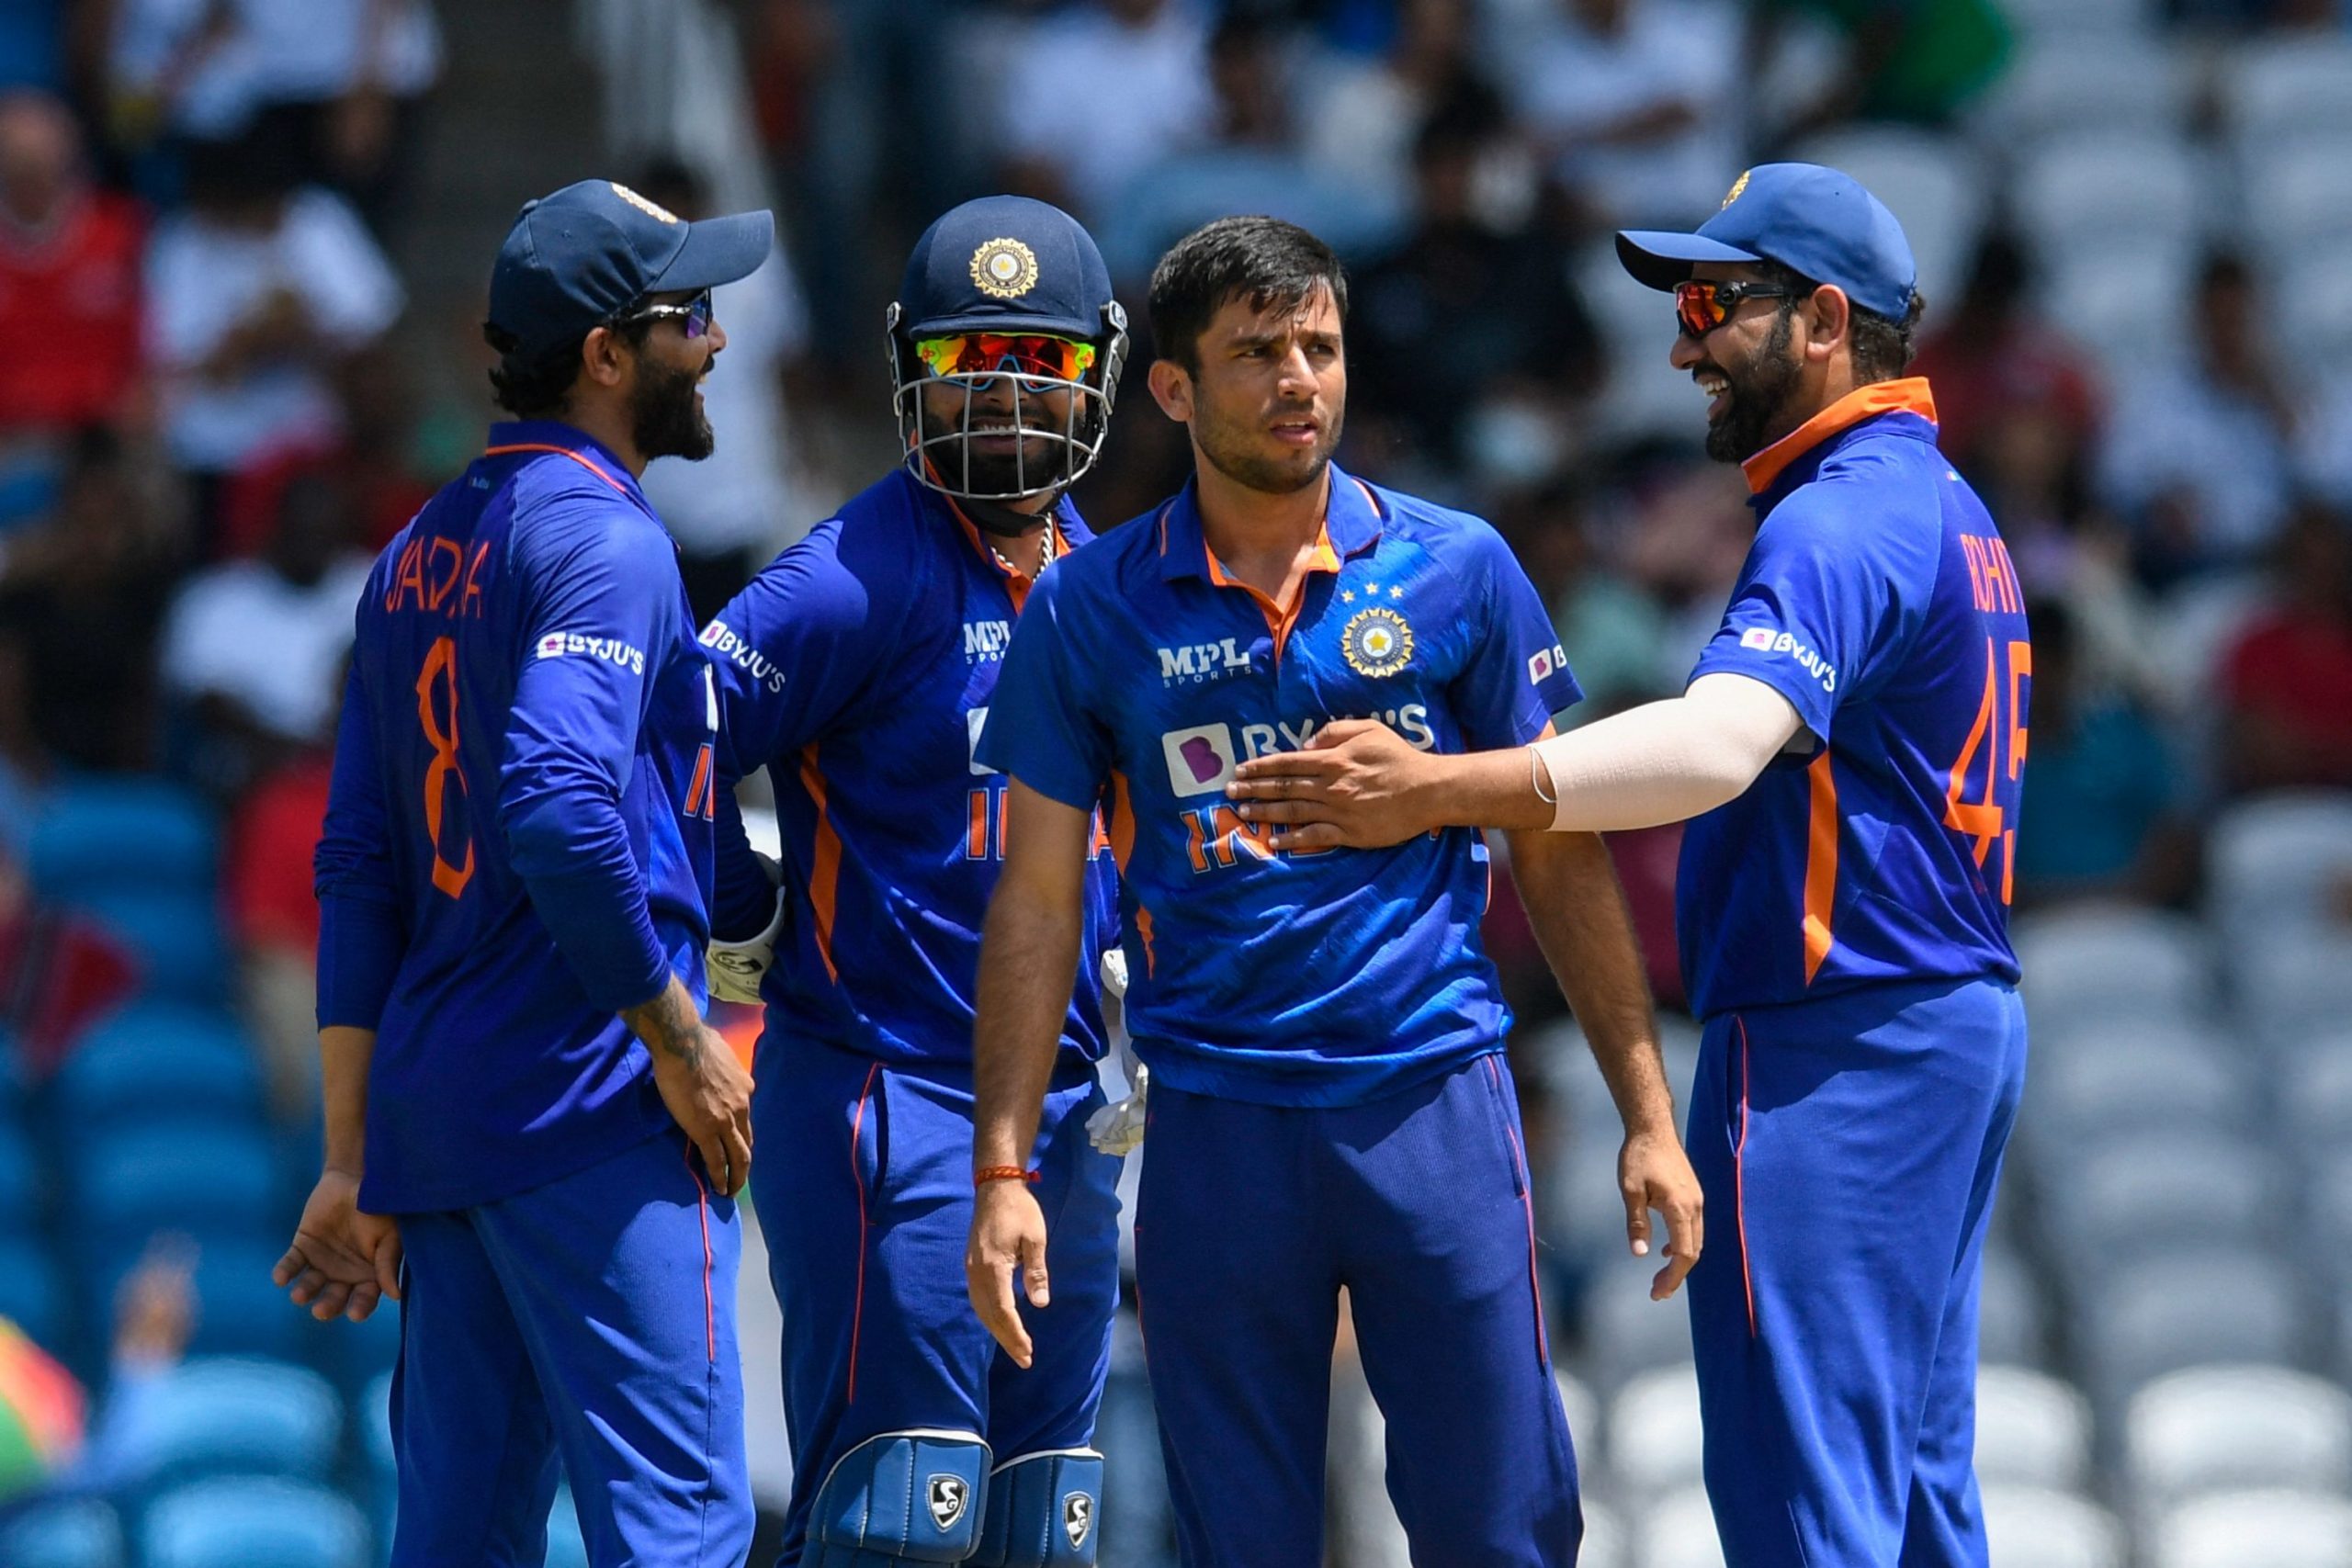 Collapso cricket: India brushes aside West Indies by 68 runs